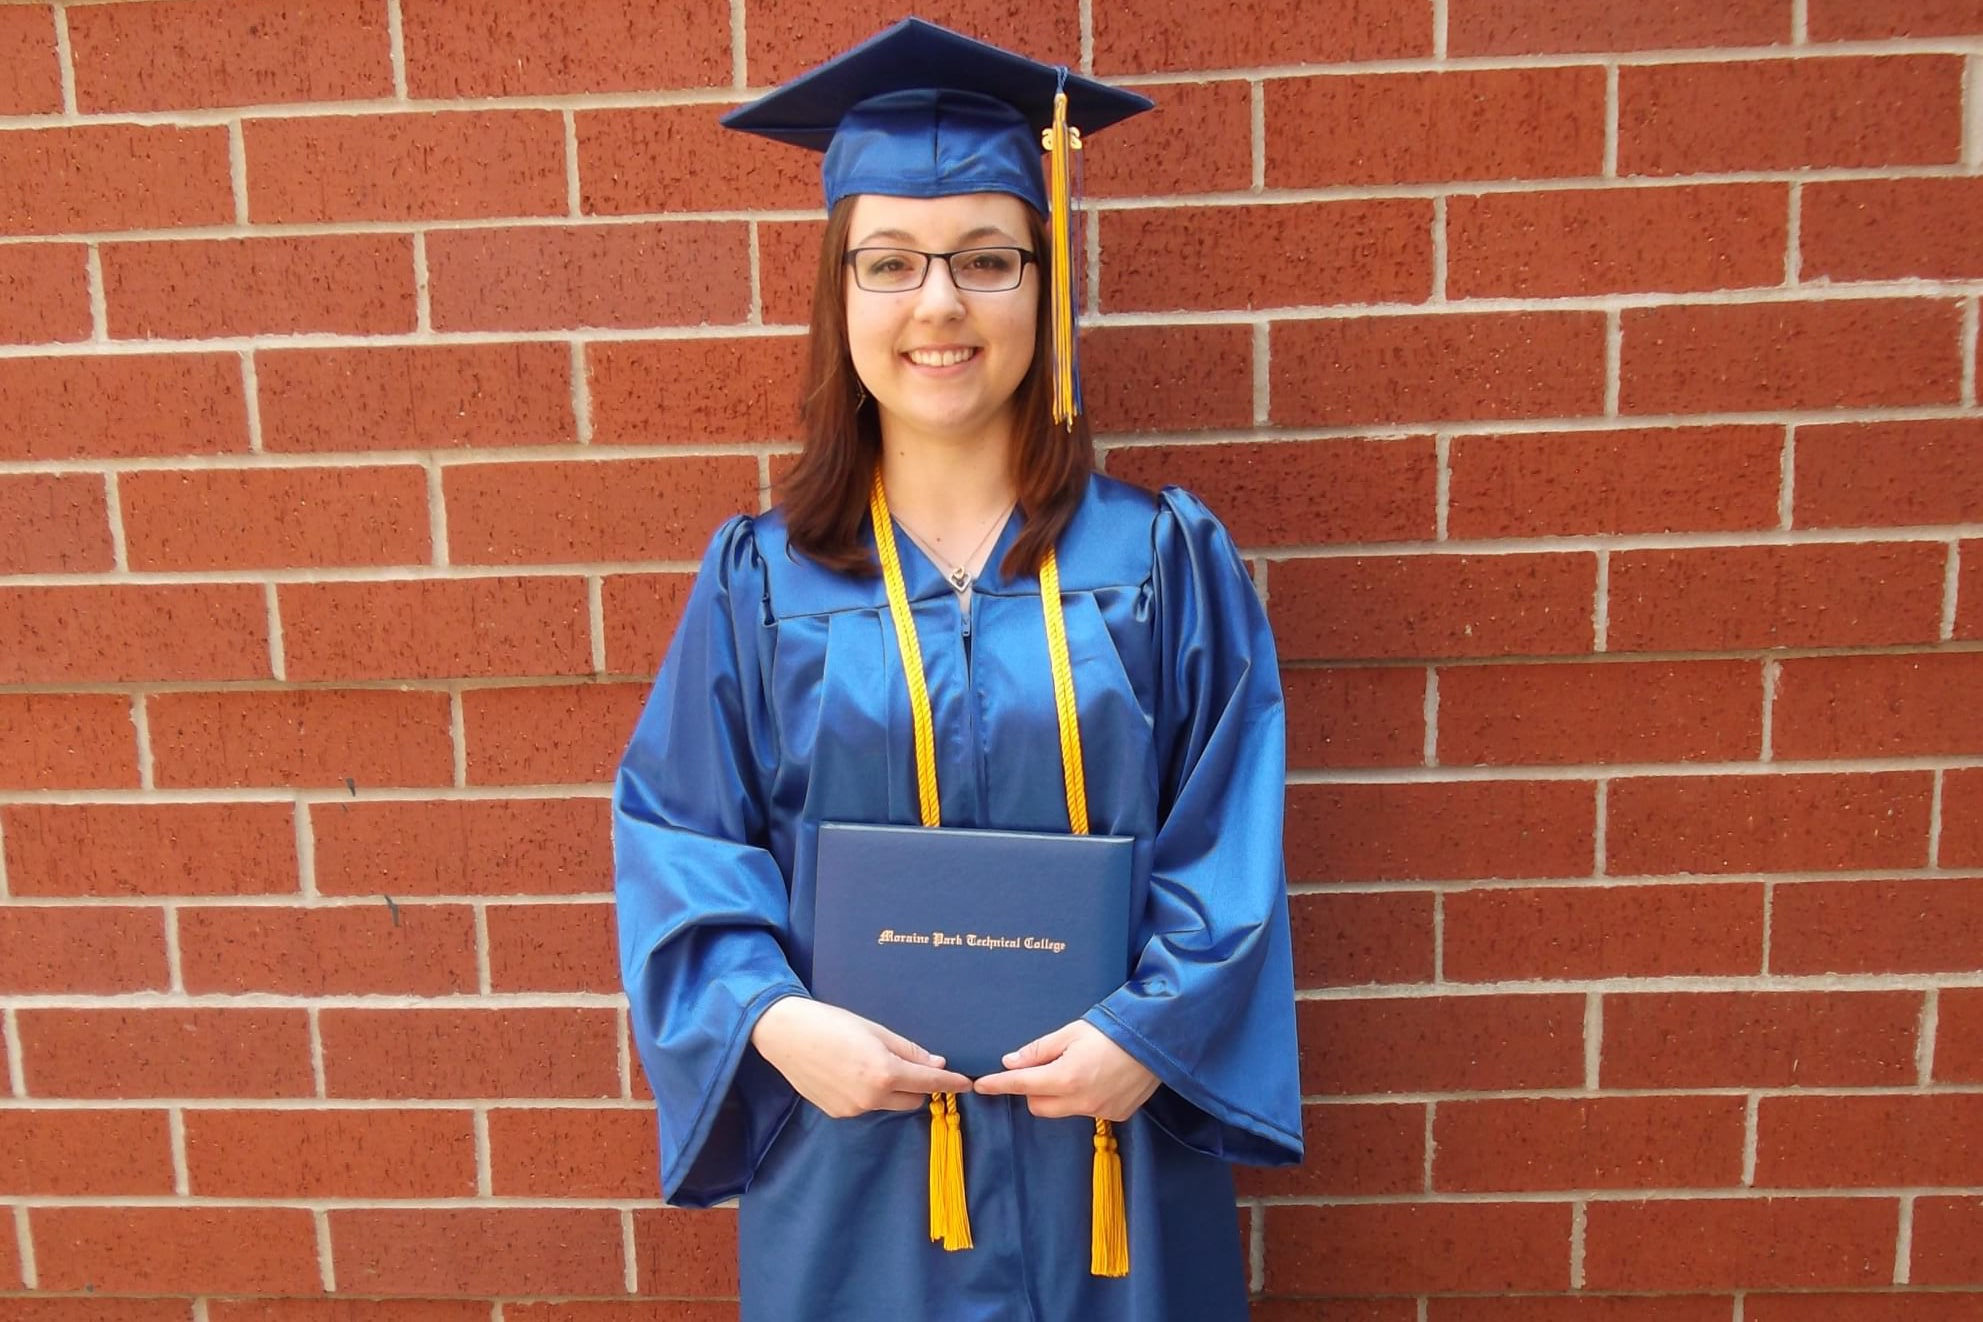 Female Moraine Park student standing against brick wall in grad apparel and diploma